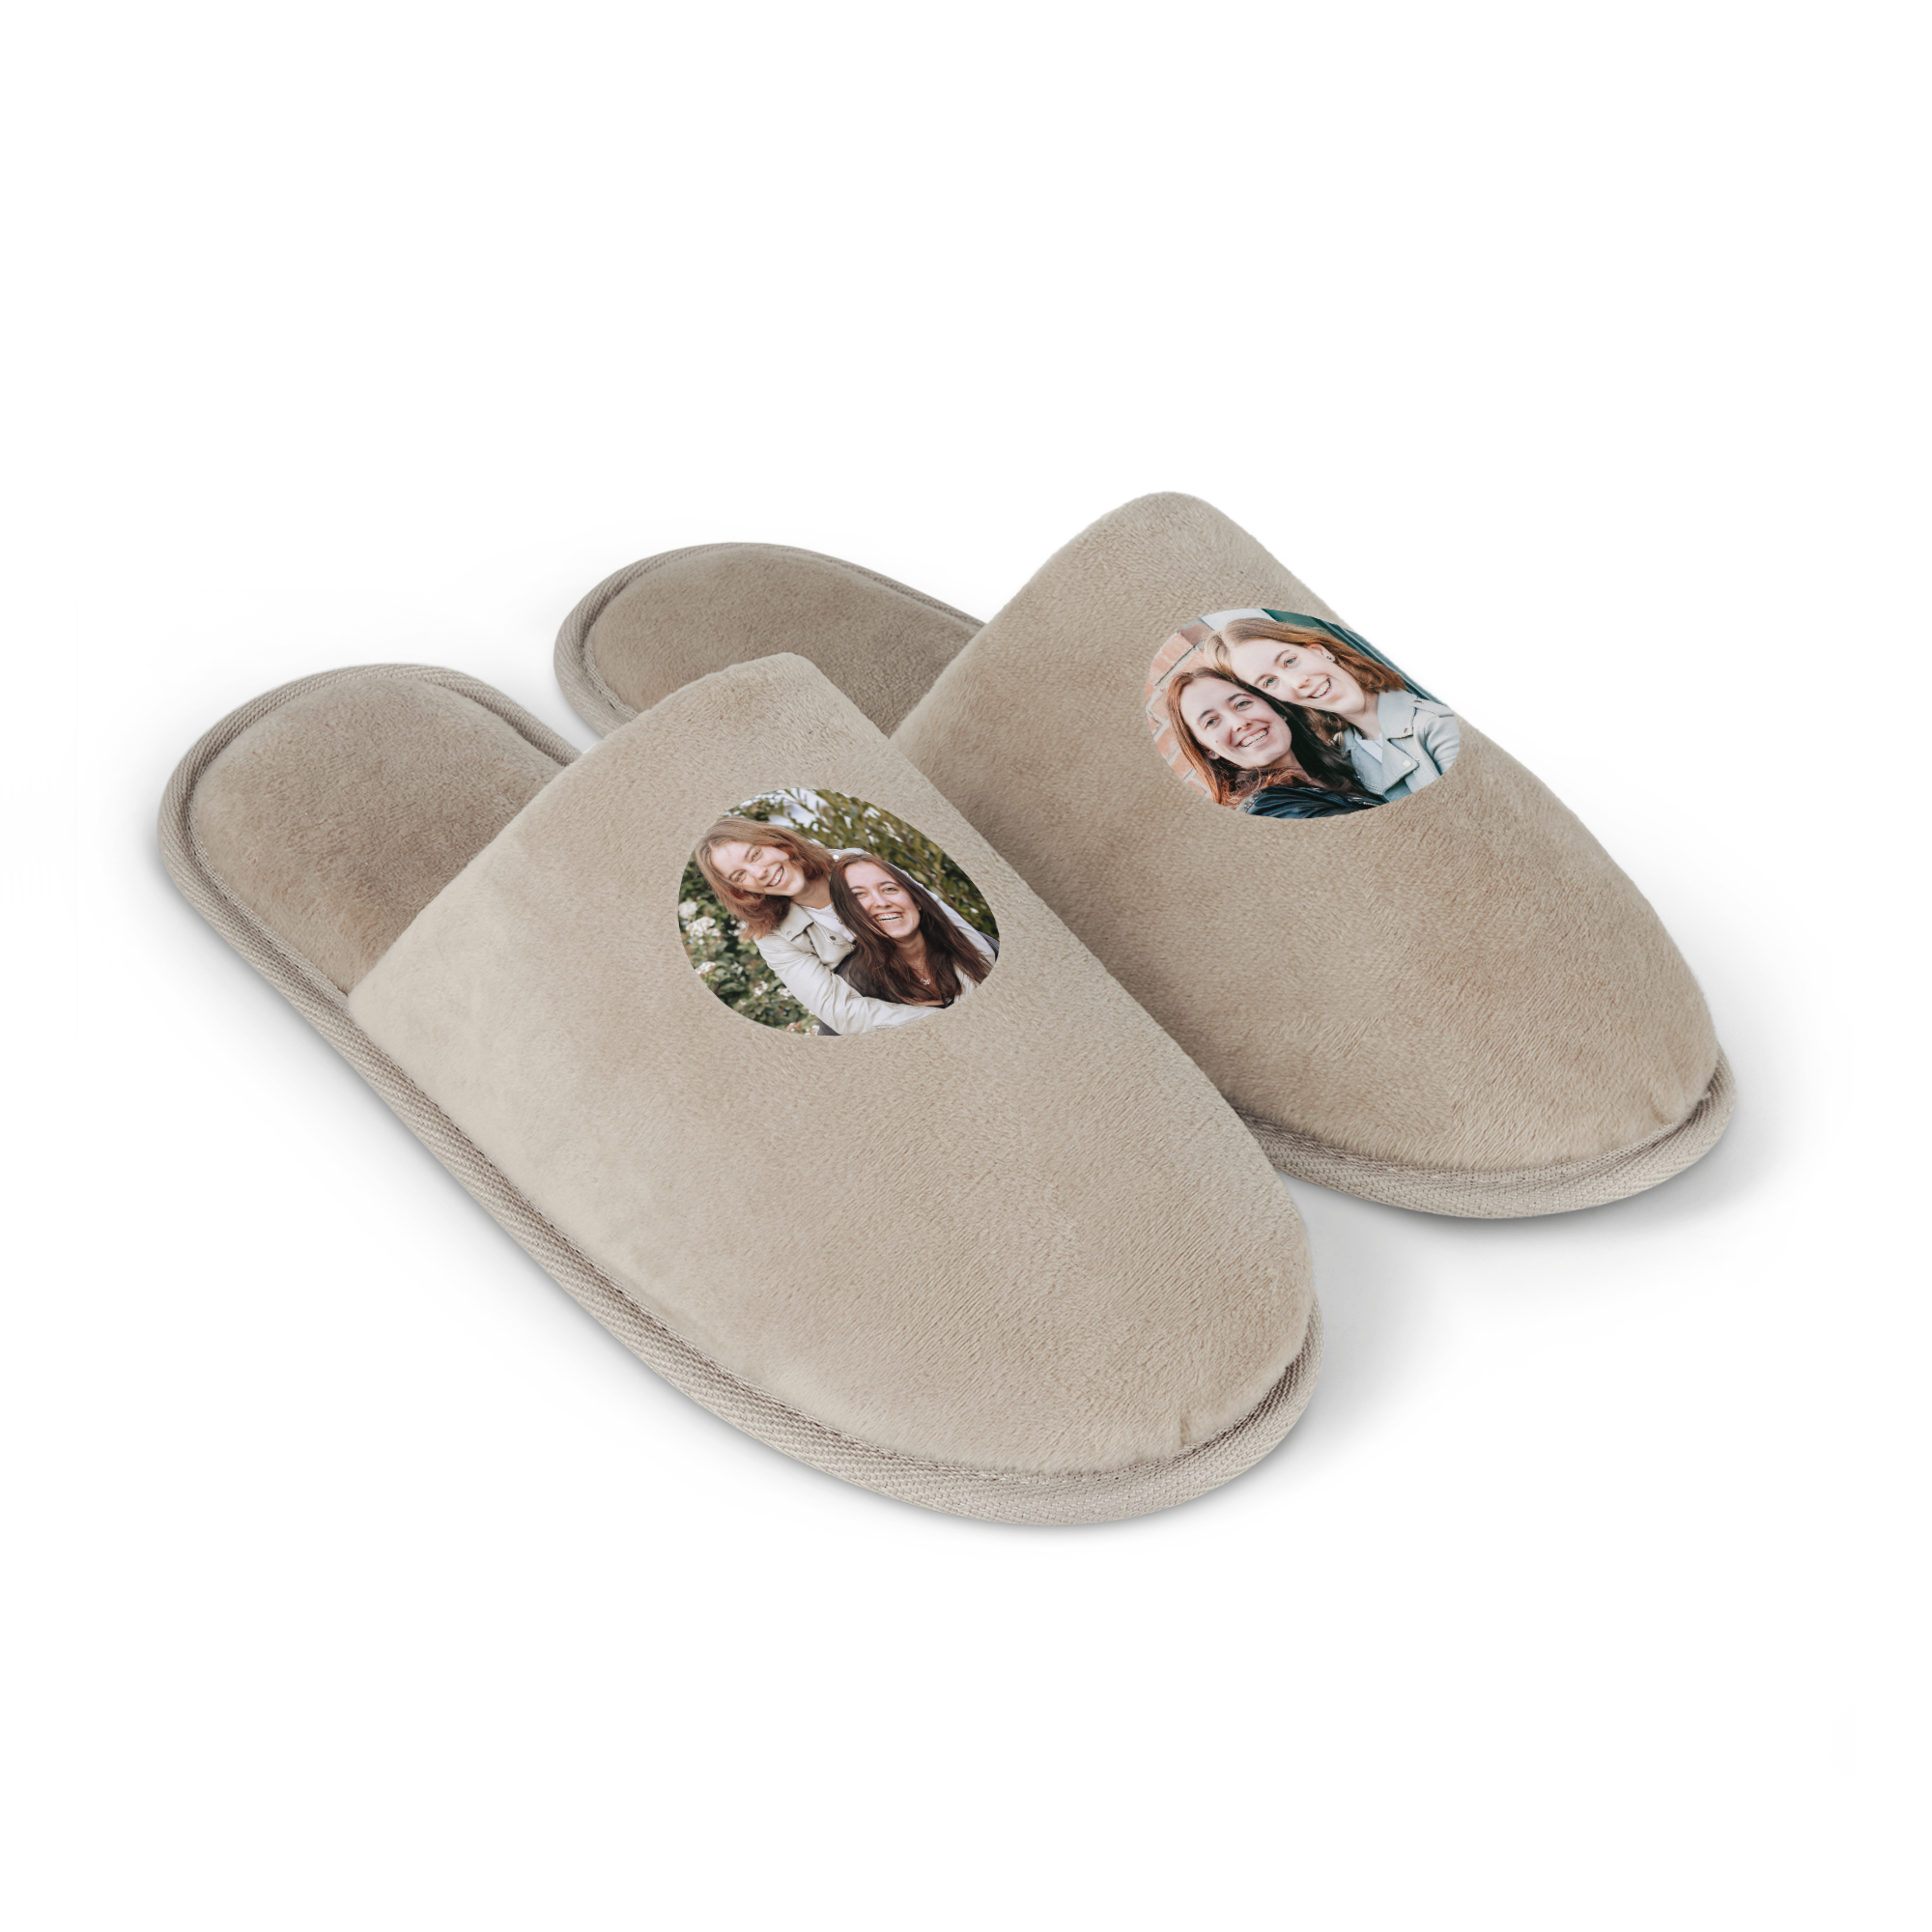 Personalised slippers - Beige - Size 36-38